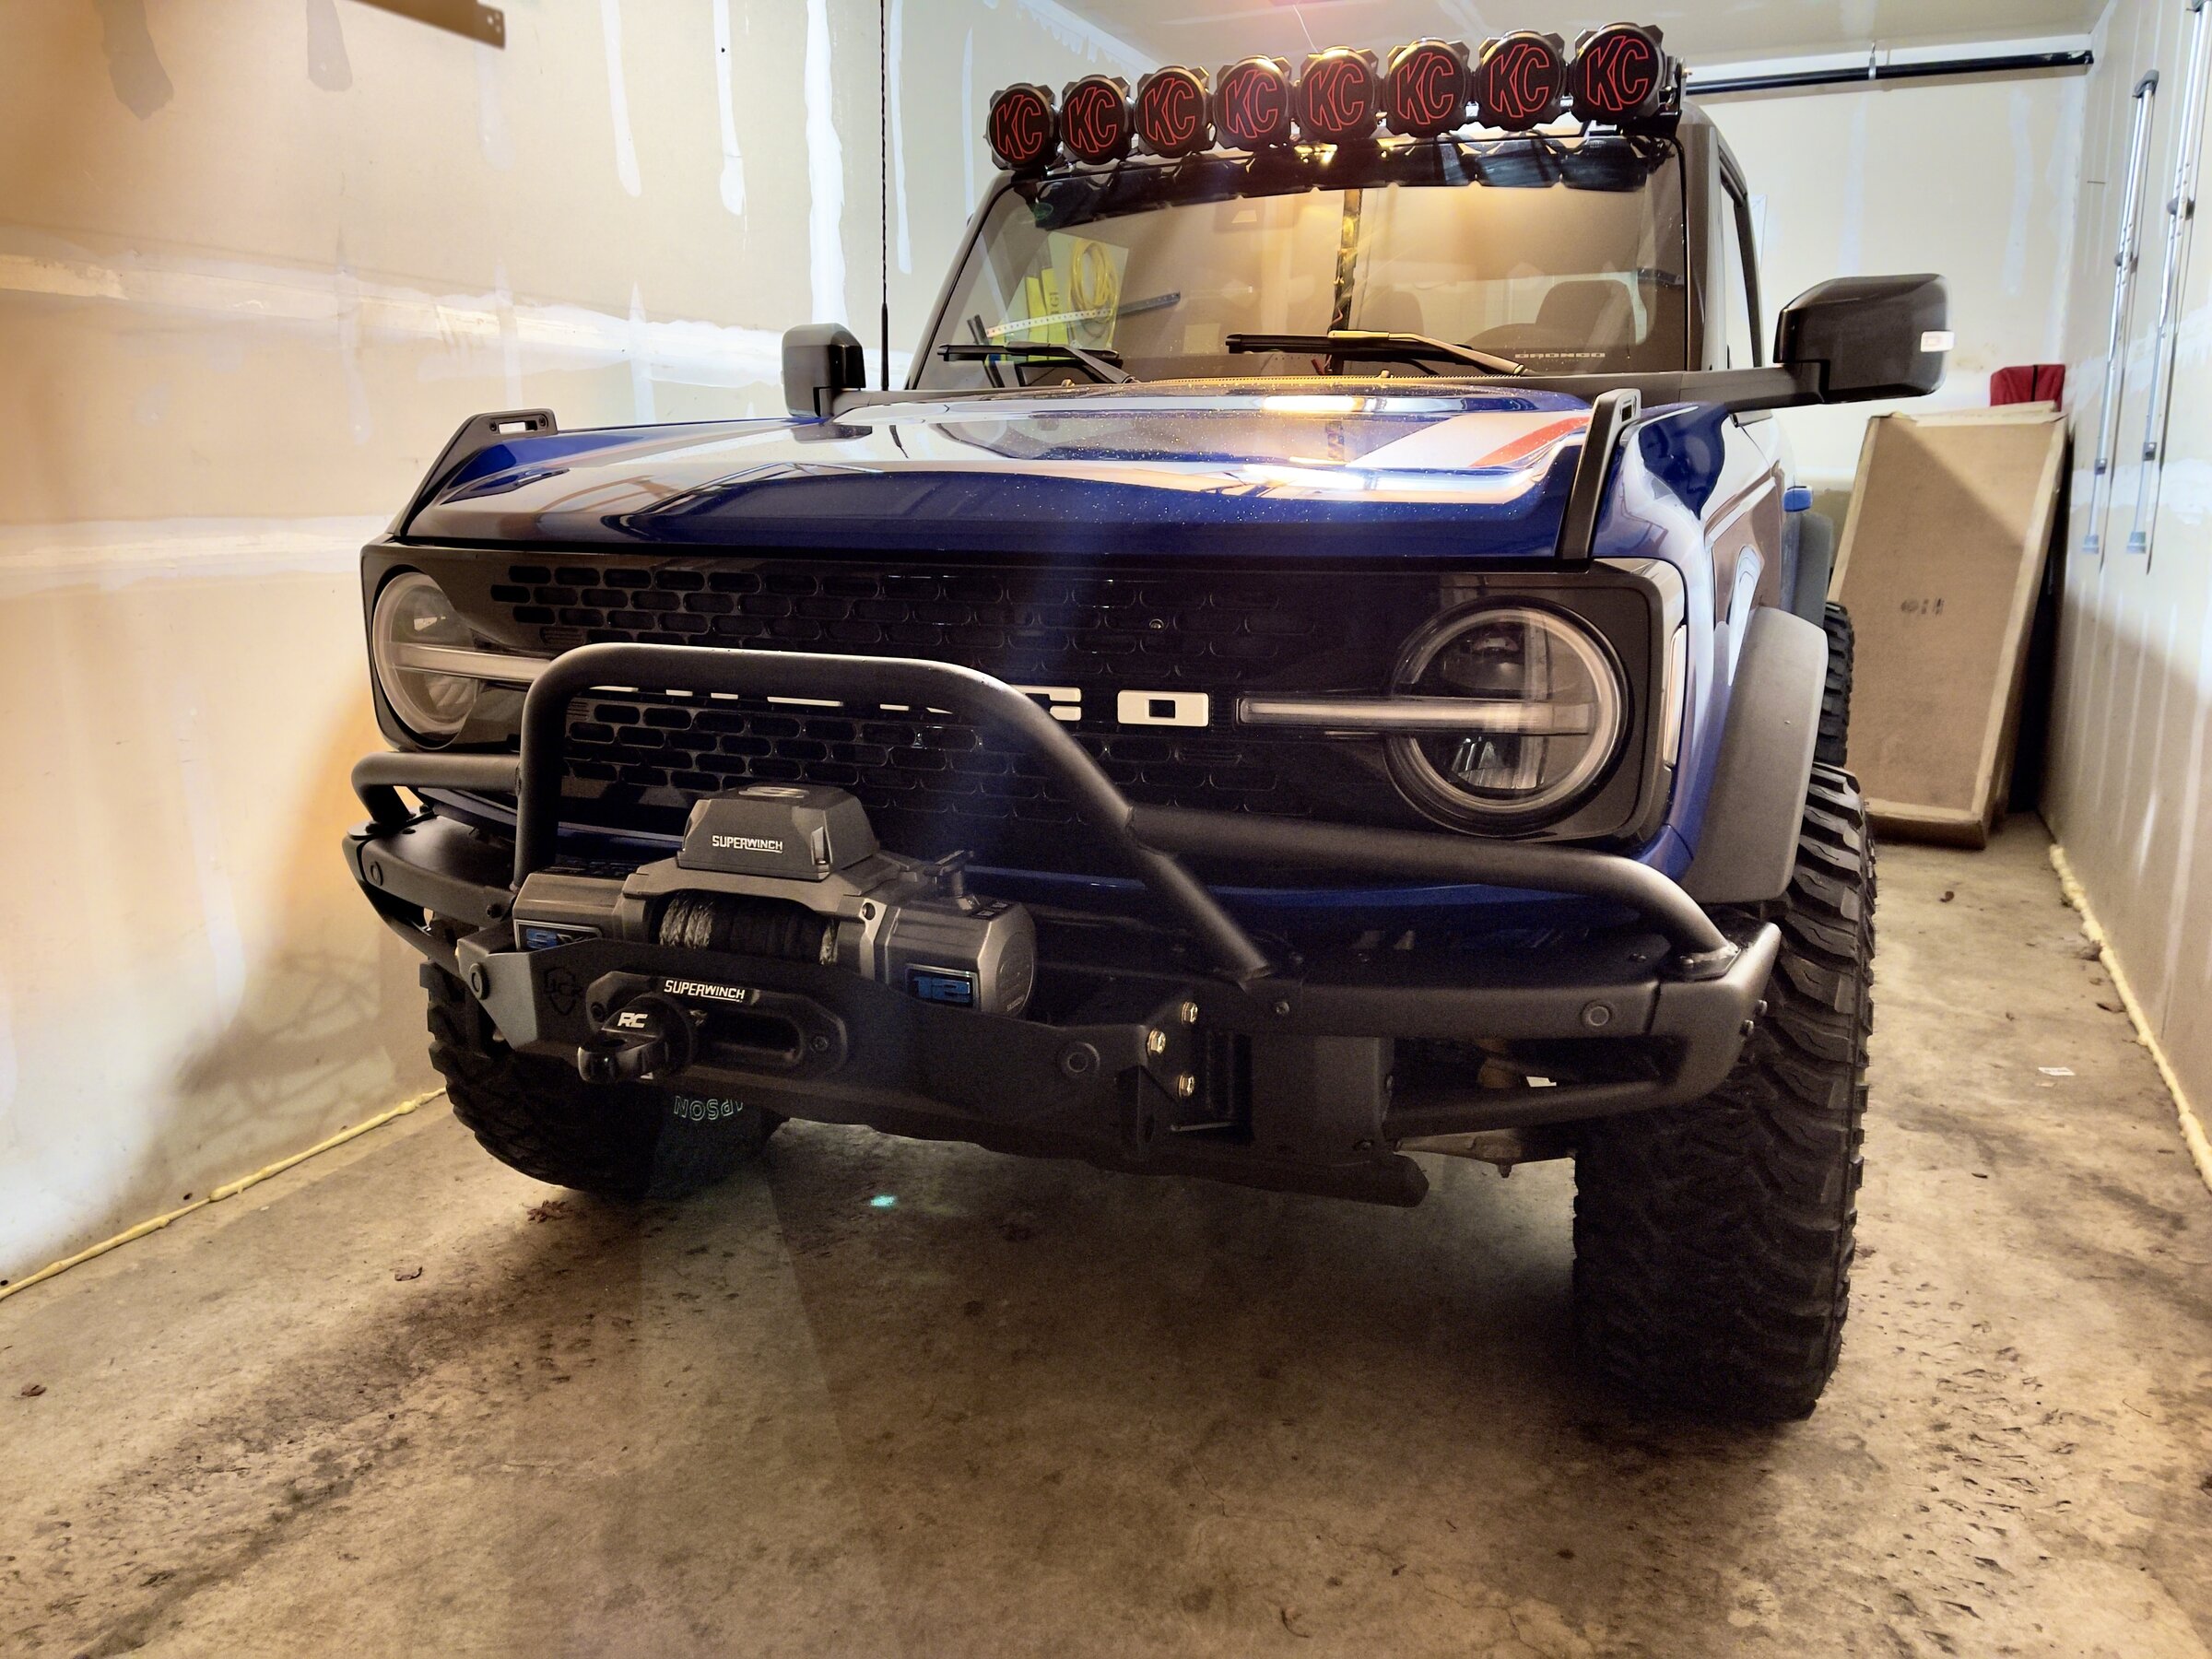 Ford Bronco Lbracket 2 door FE build (UPDATED) on Zone 3" lift and 37's 4B2F0F57-4D19-4D31-B050-7845988AF308